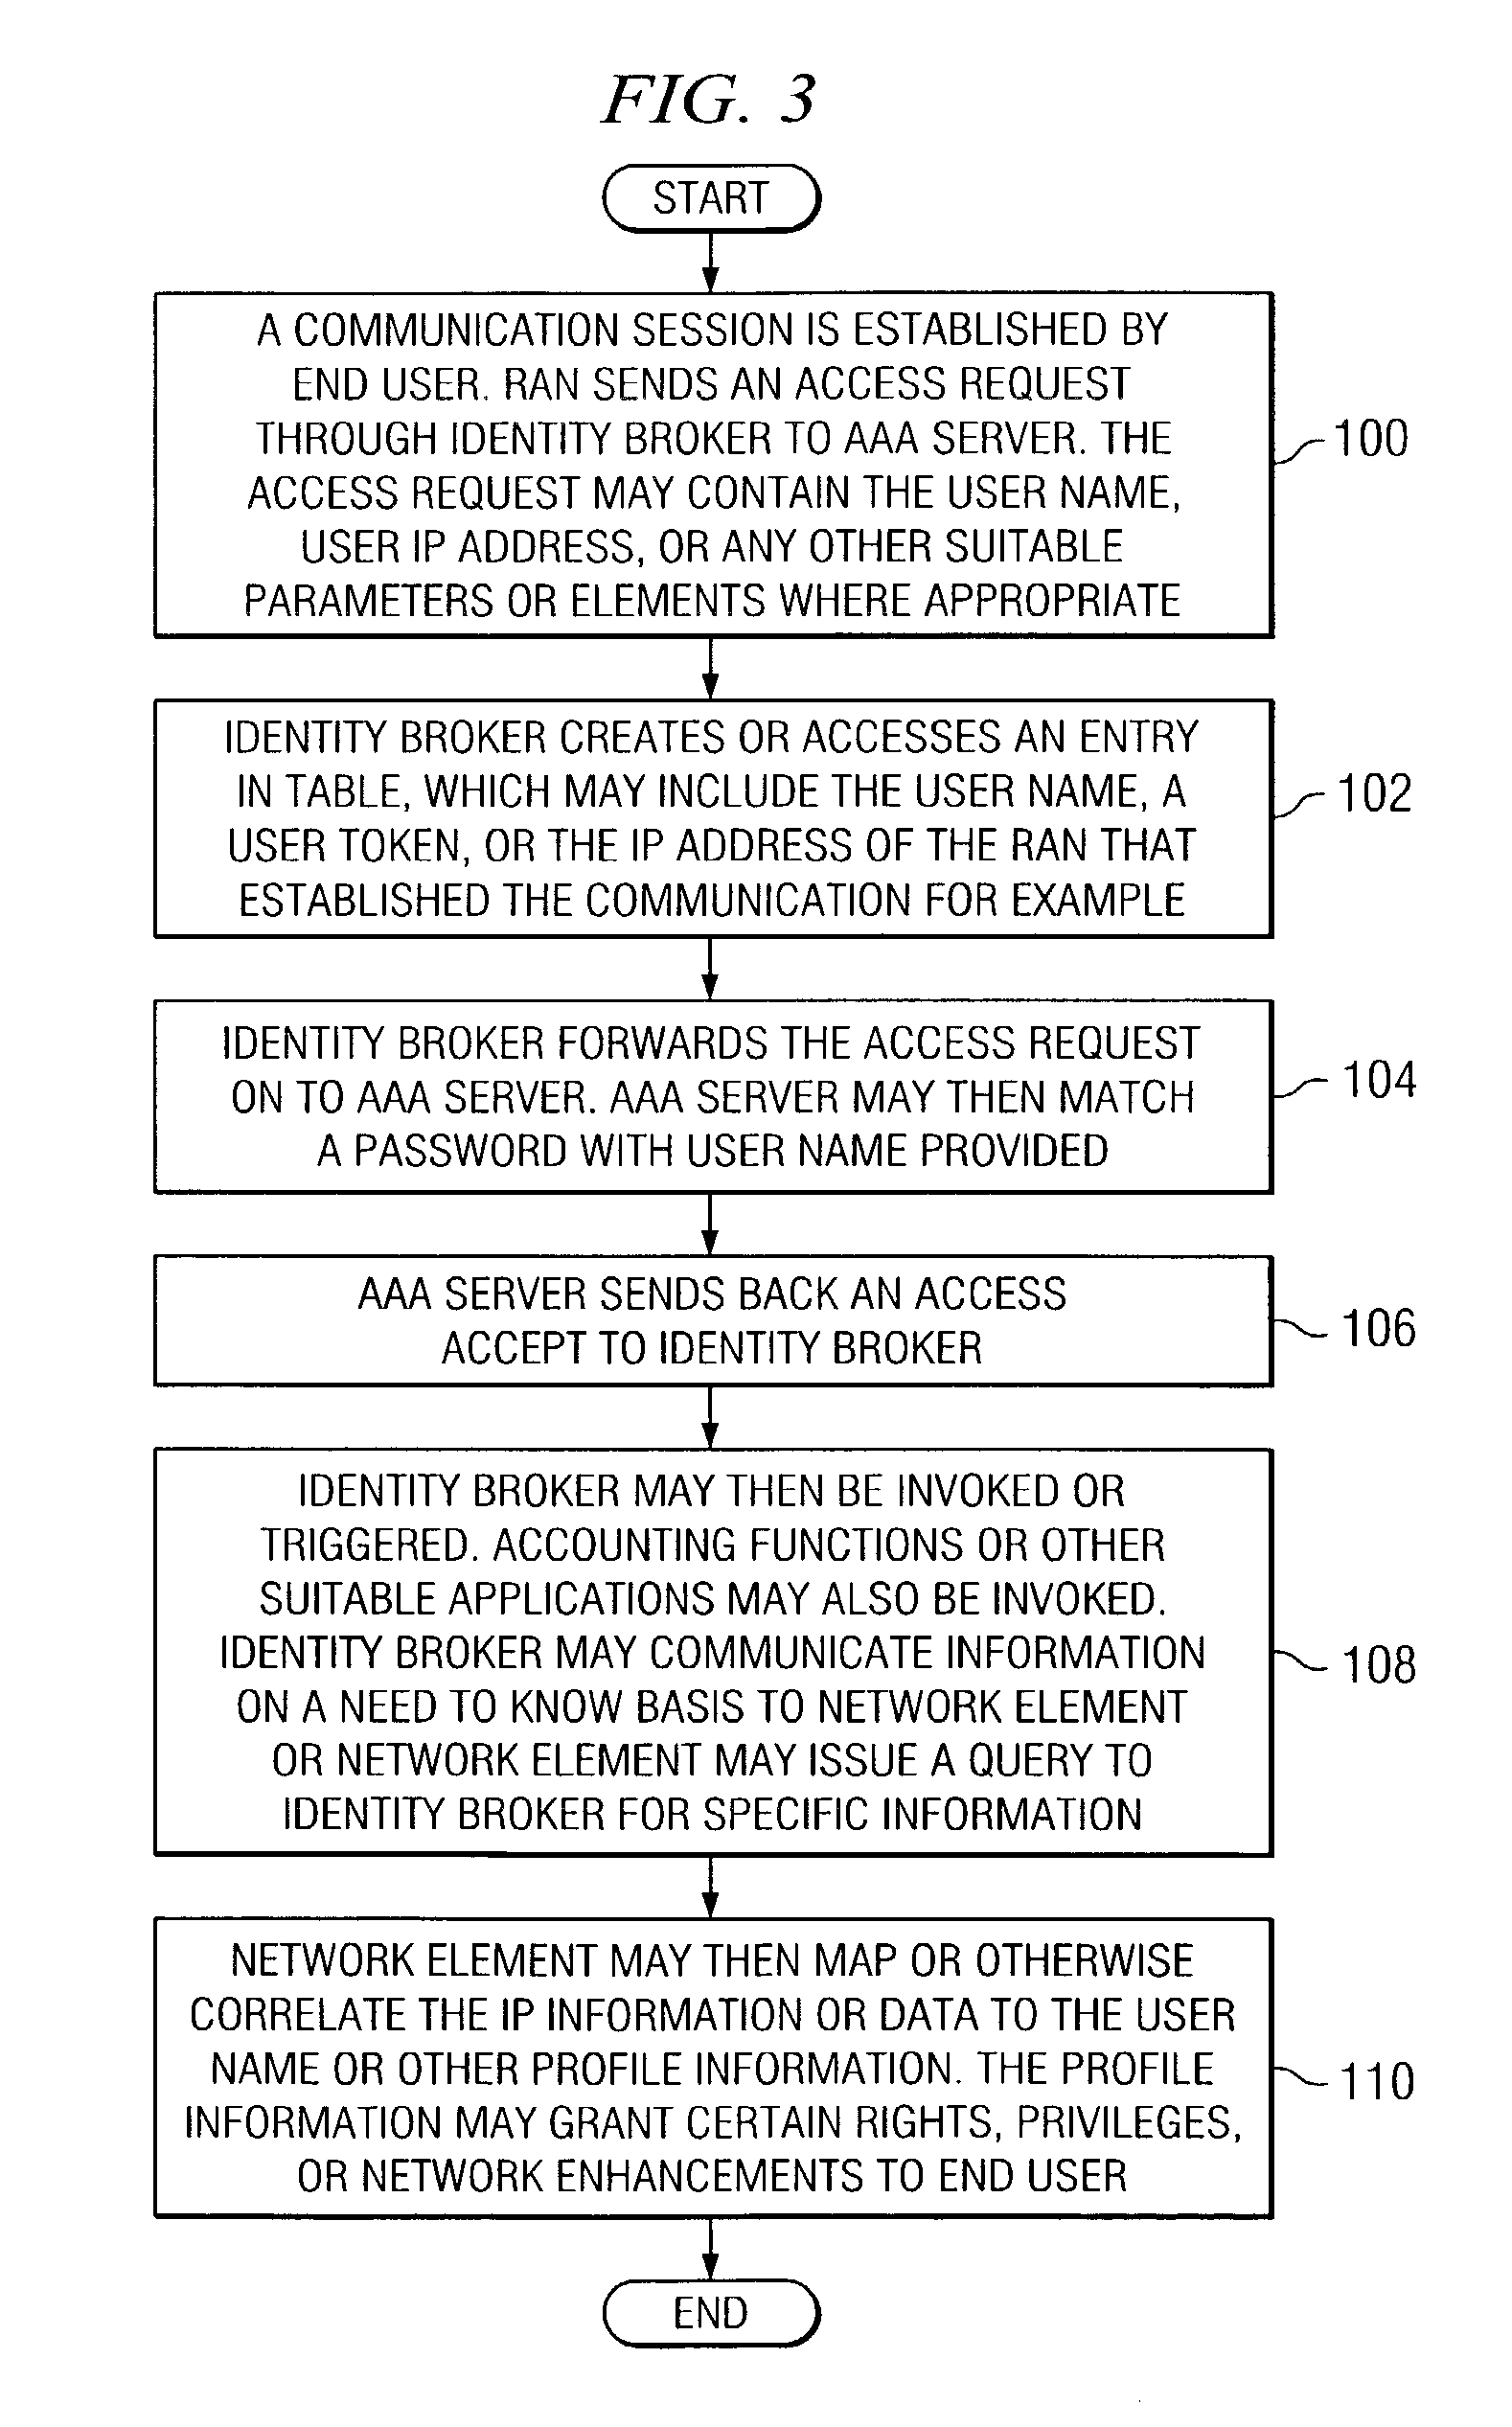 System and method for distributing information in a network environment